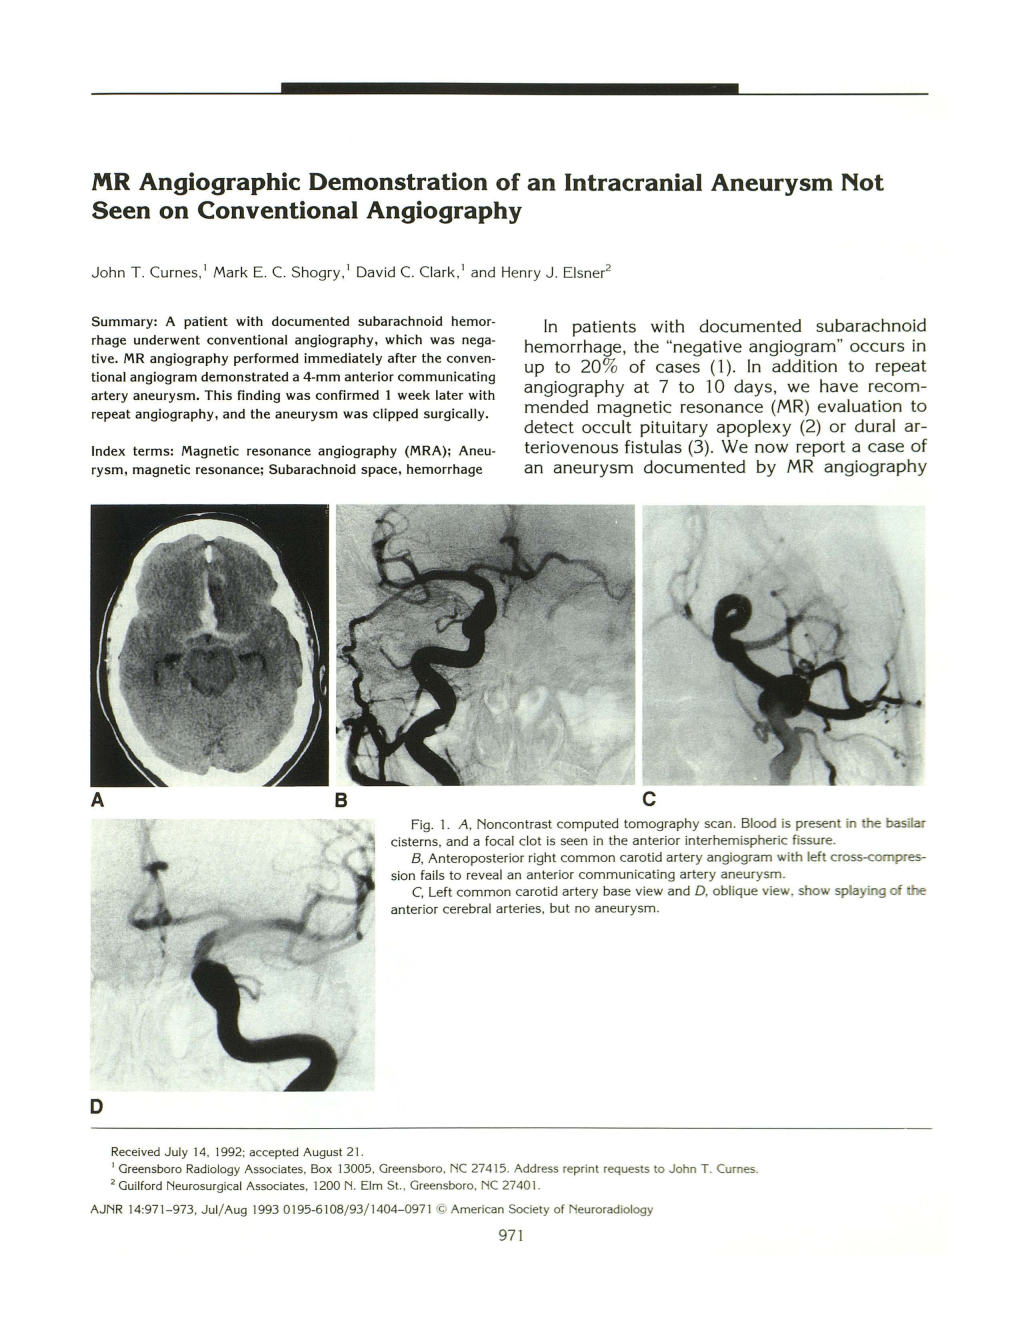 MR Angiographic Demonstration of an Intracranial Aneurysm Not Seen on Conventional Angiography